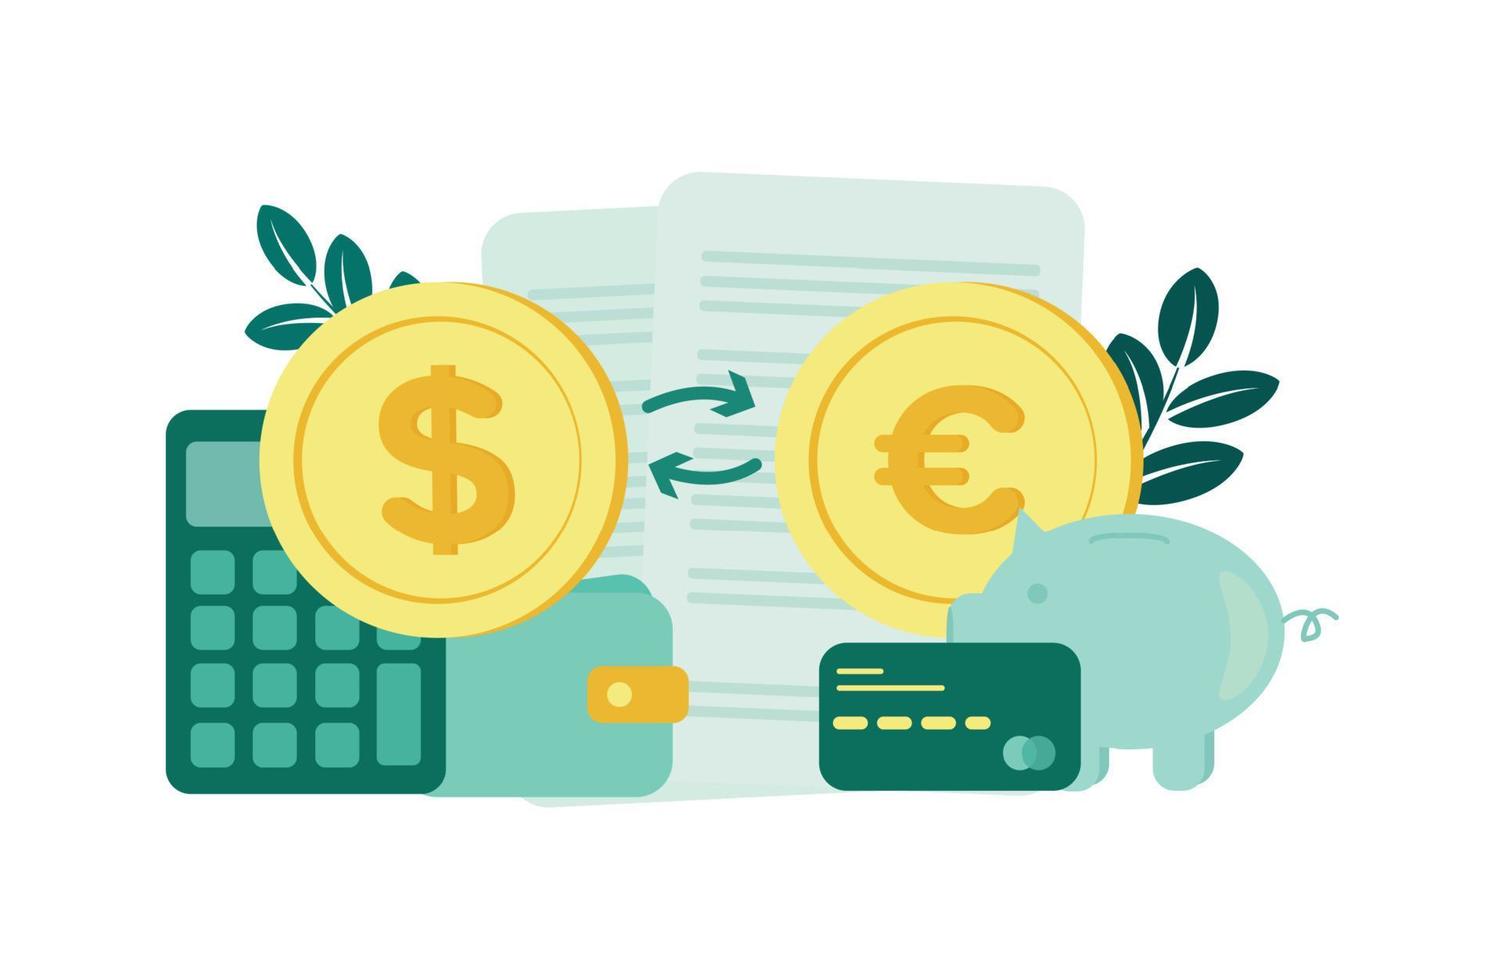 Finance. International Currency Exchange. Between dollar and euro coins, turnover arrows, near them a calculator, wallet, card, piggy bank, documents. Vector illustration